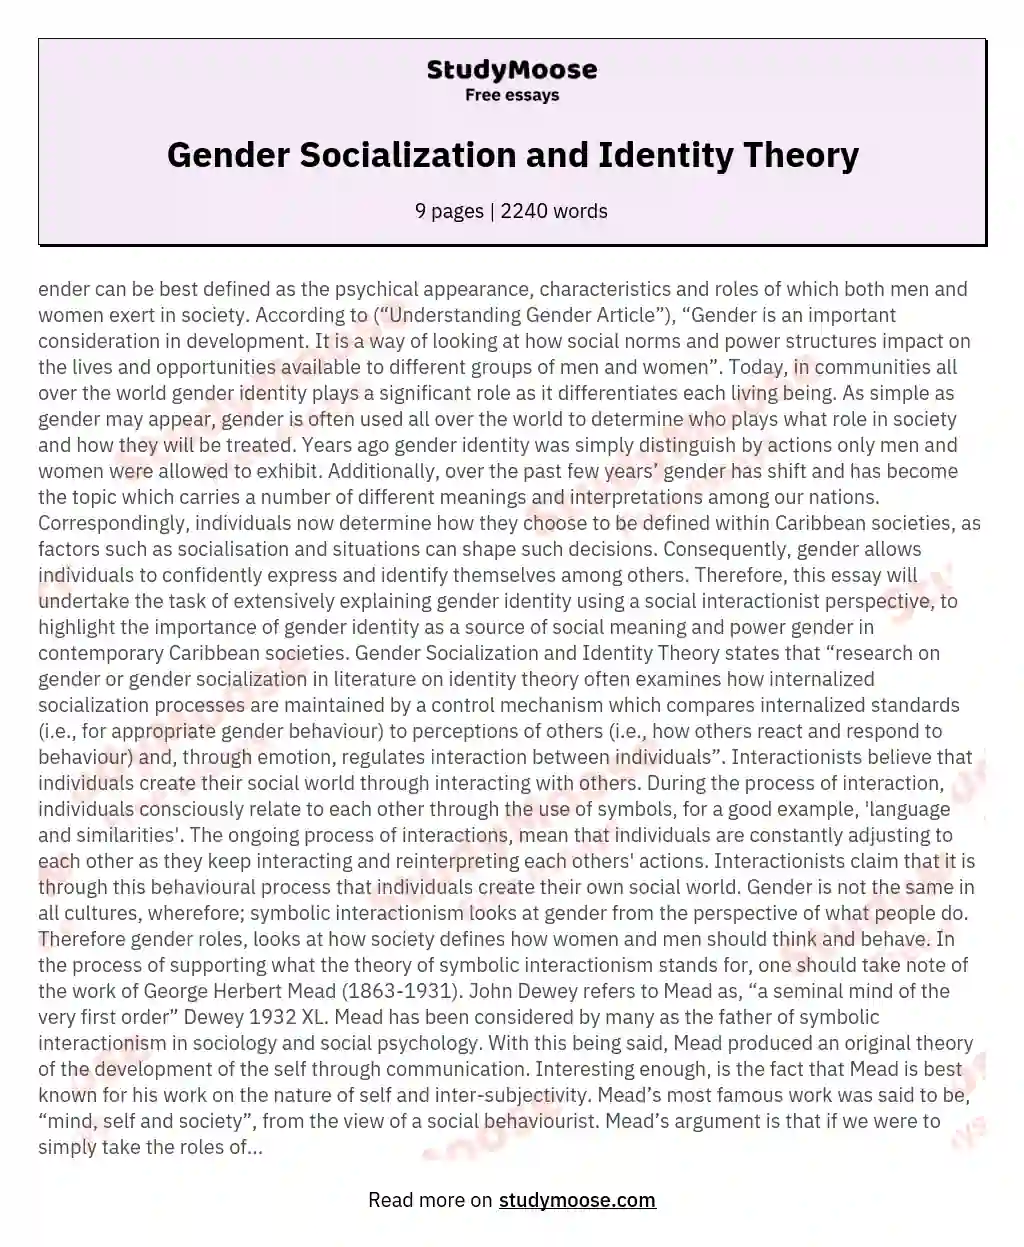 Gender Socialization and Identity Theory essay